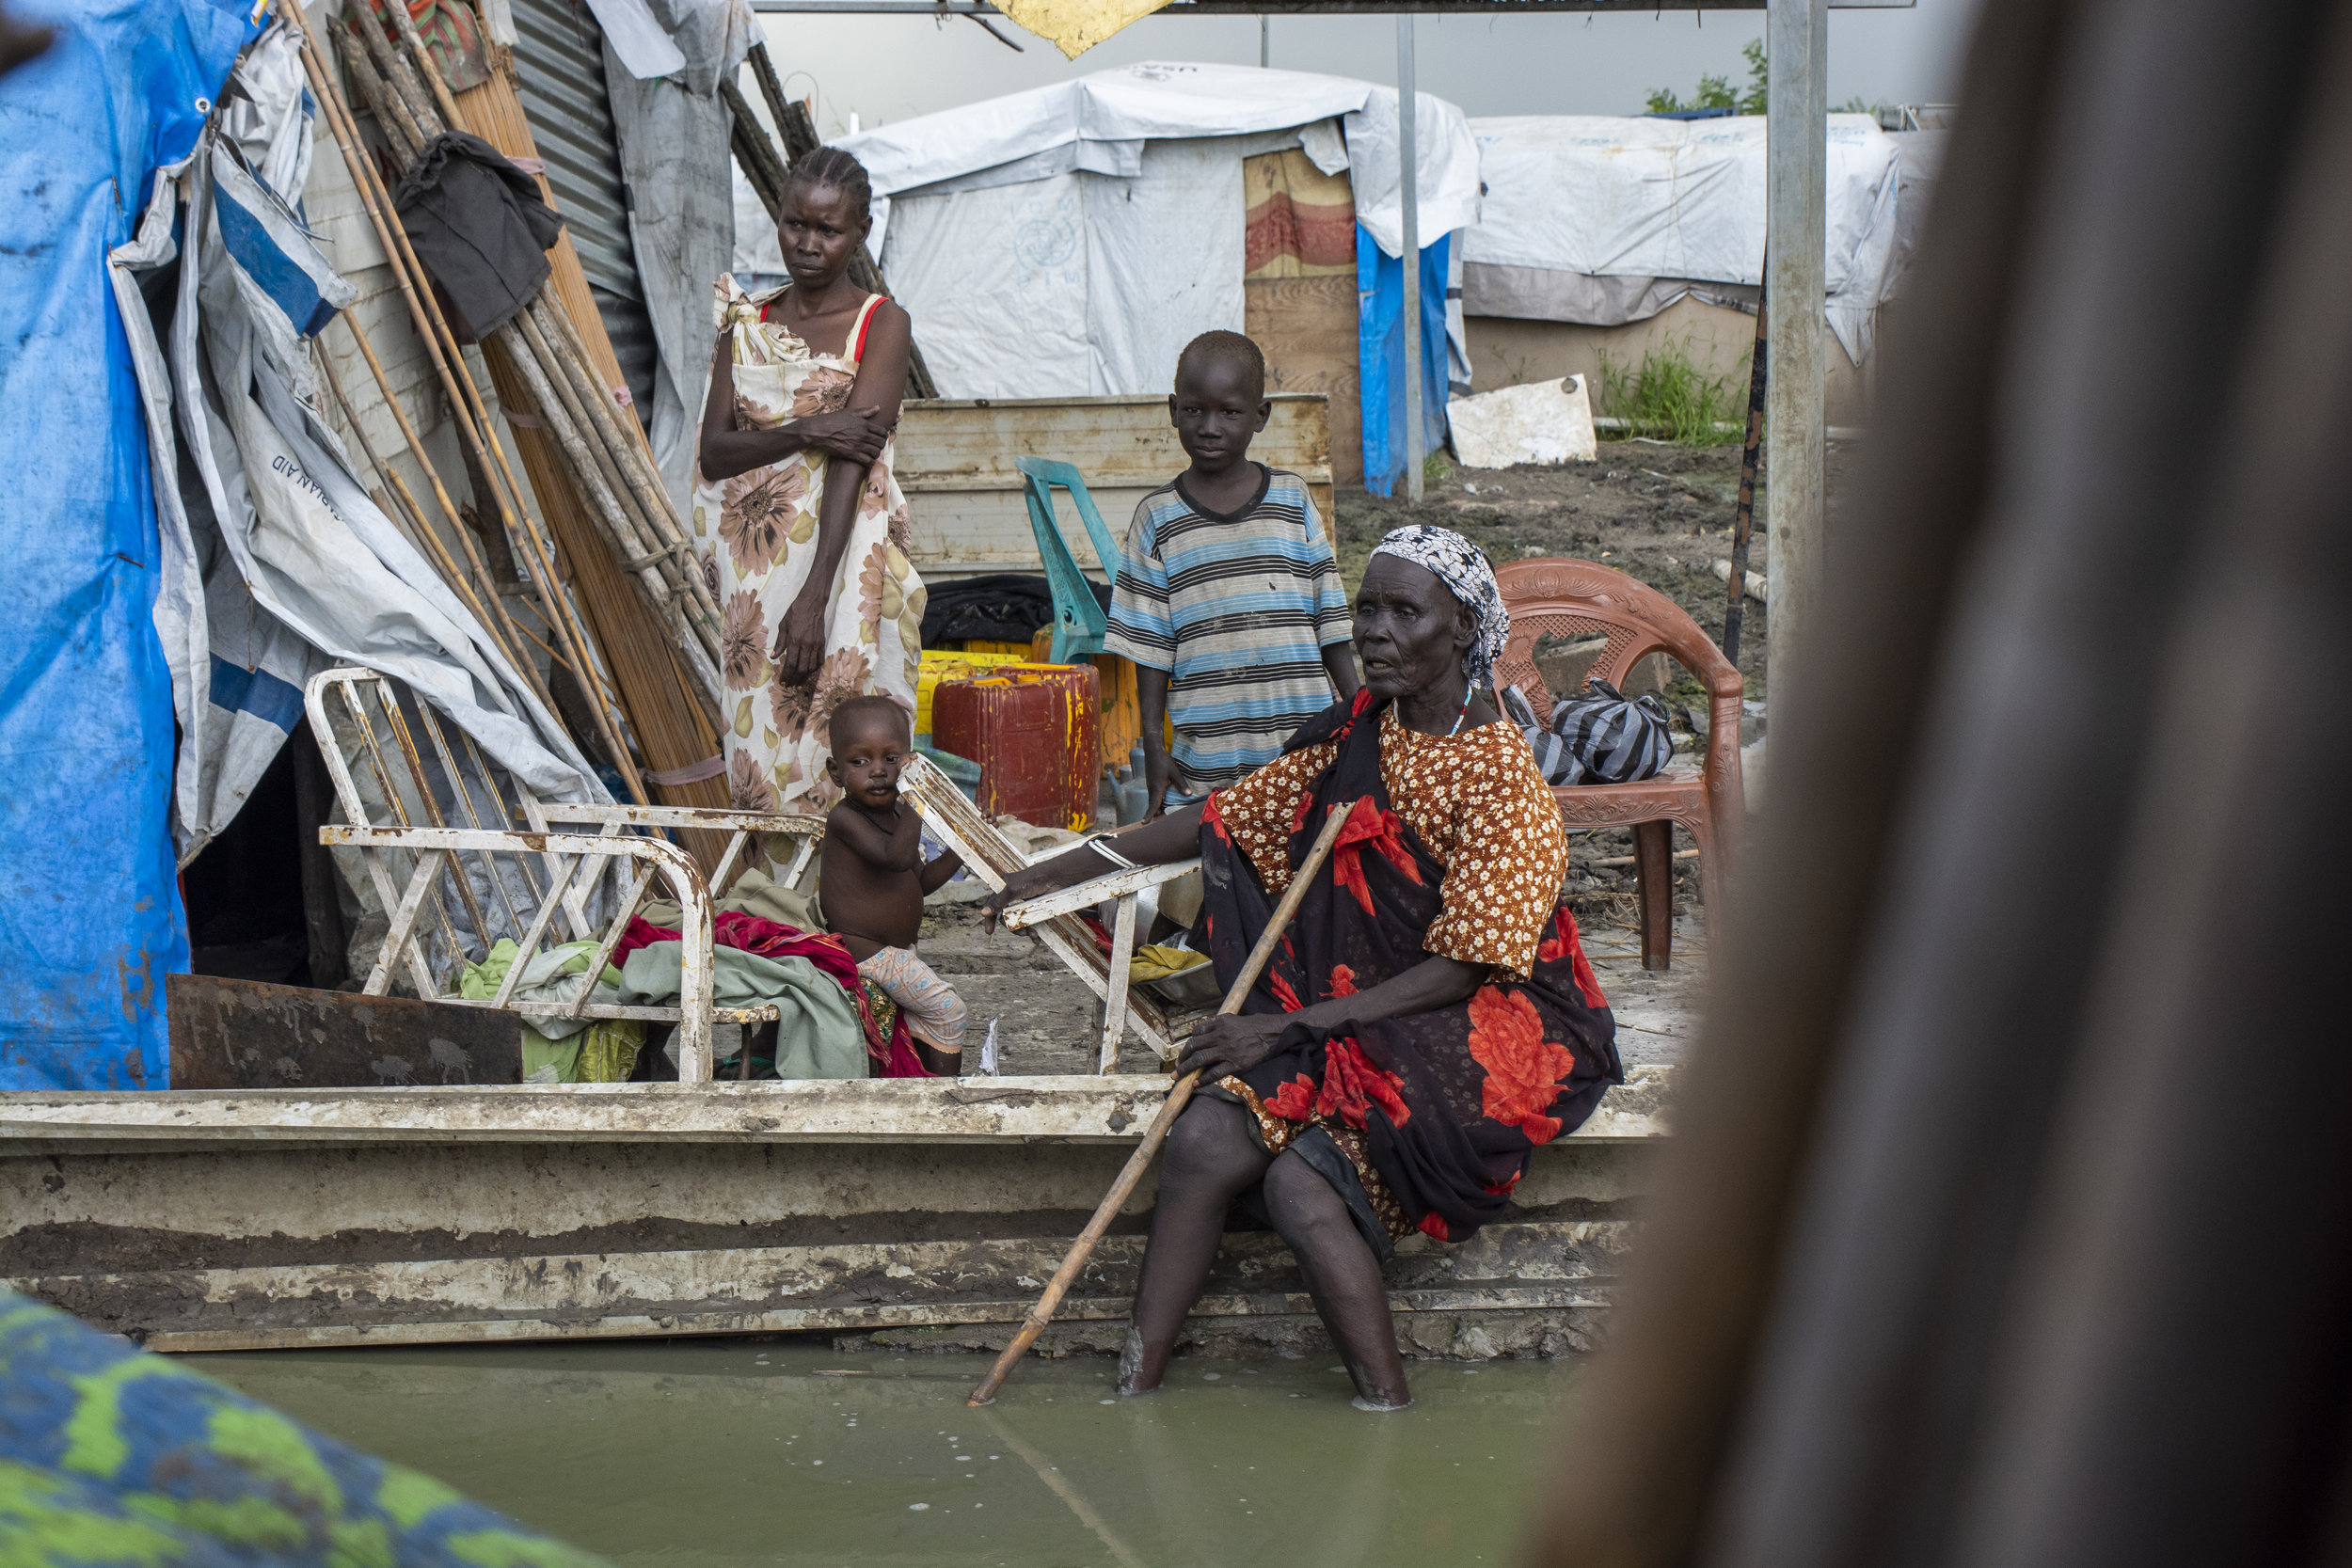  A displaced family next to a makeshift home at the U.N. base in Malakal. Footpaths are submerged for five months of the year during the rainy season. Many of the children here suffer from acute malnutrition and diseases such as tuberculosis. When it